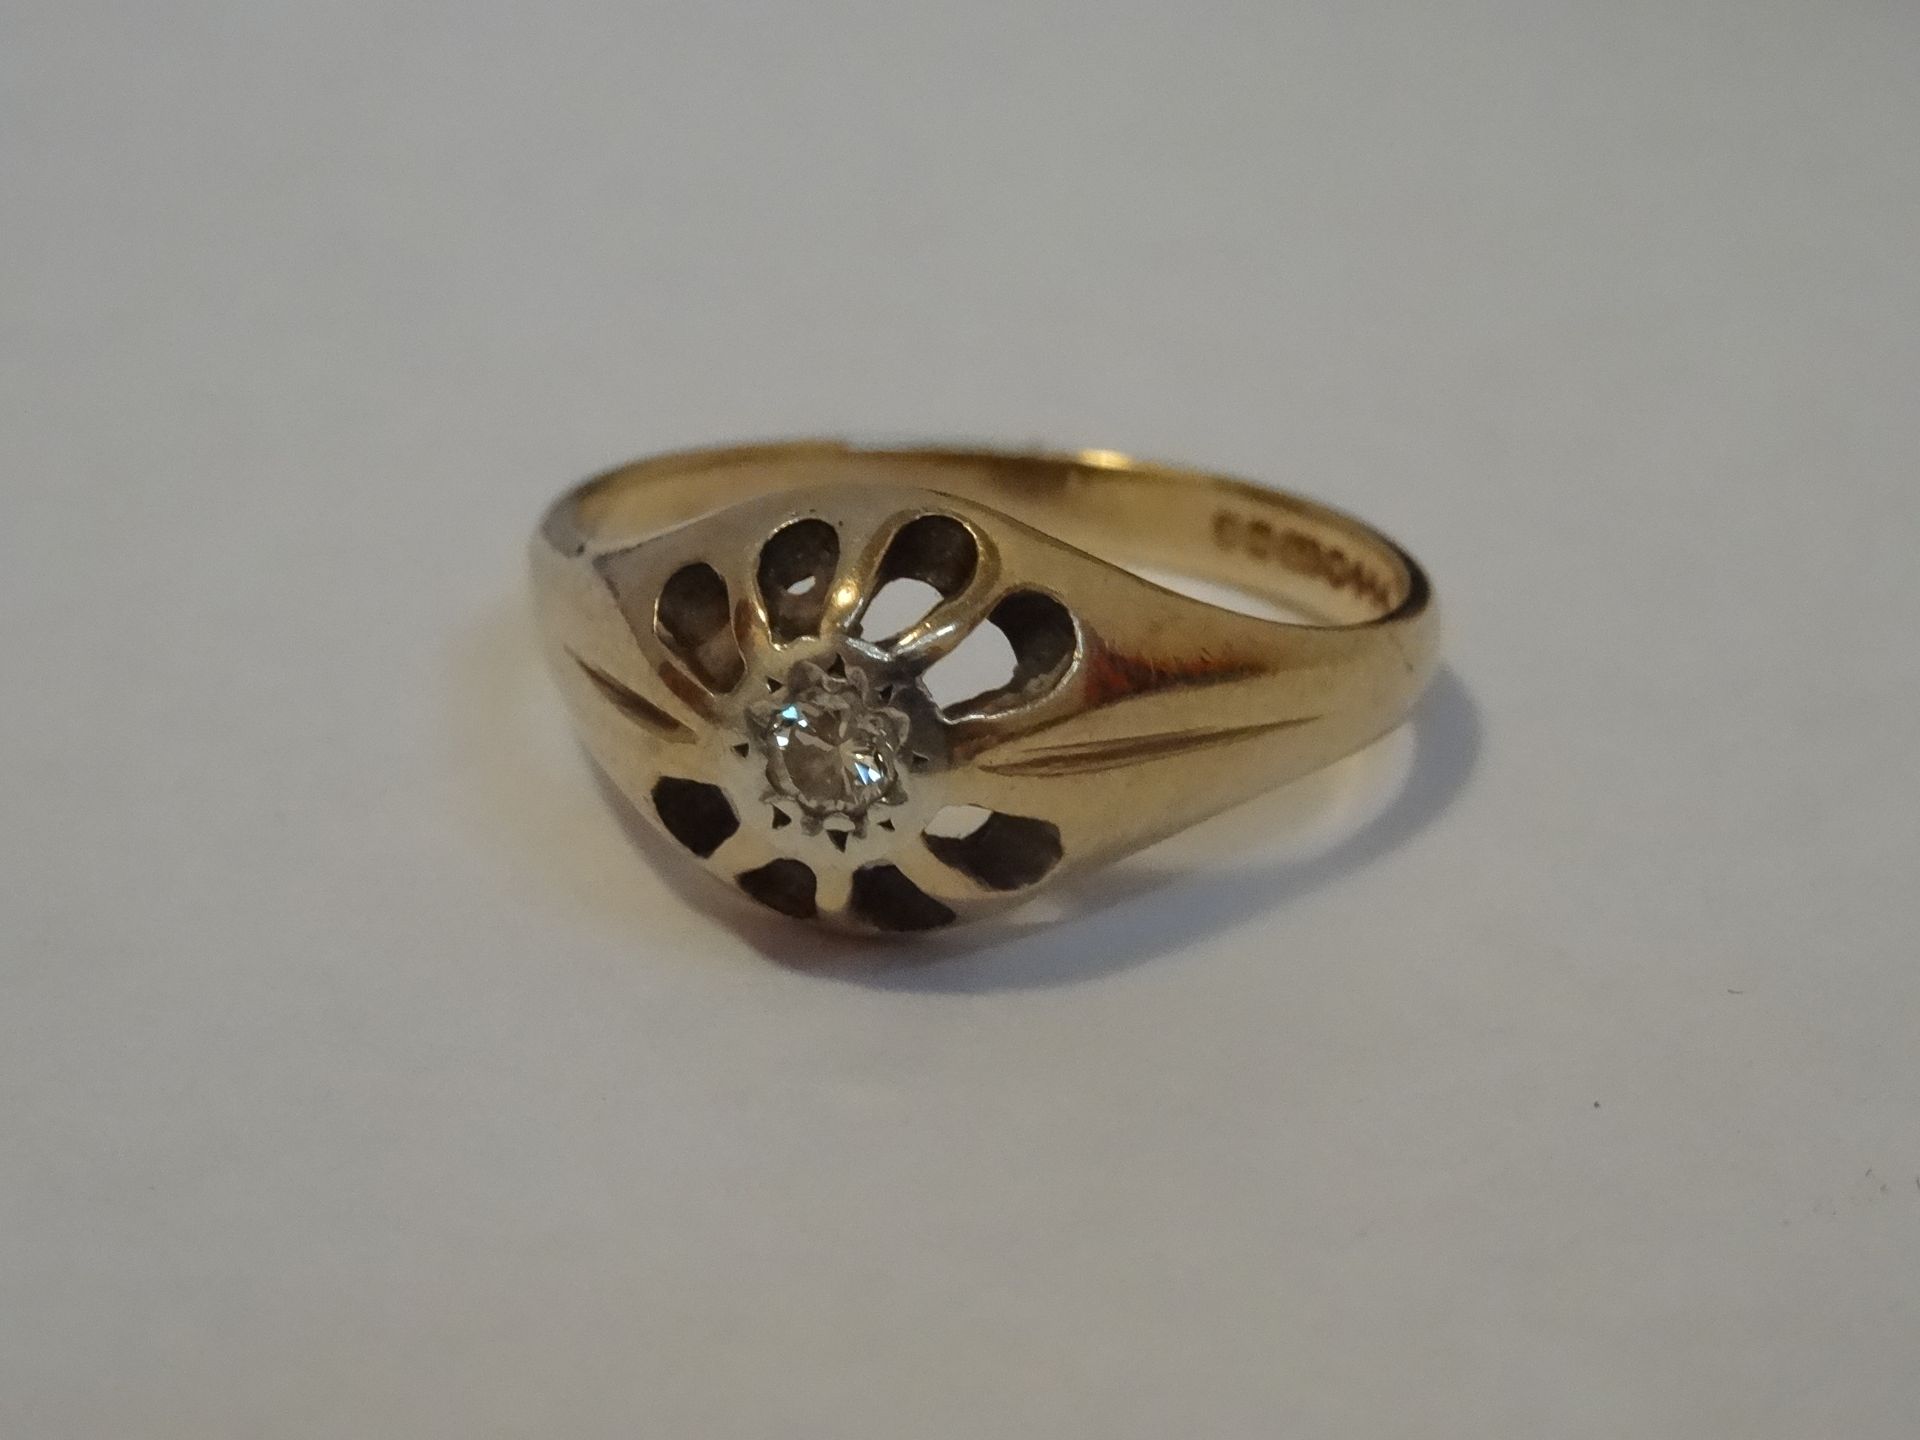 9 Carat Yellow Gold Single Stone Claw Design Ring. Total Piece Weight 2.73 Grams